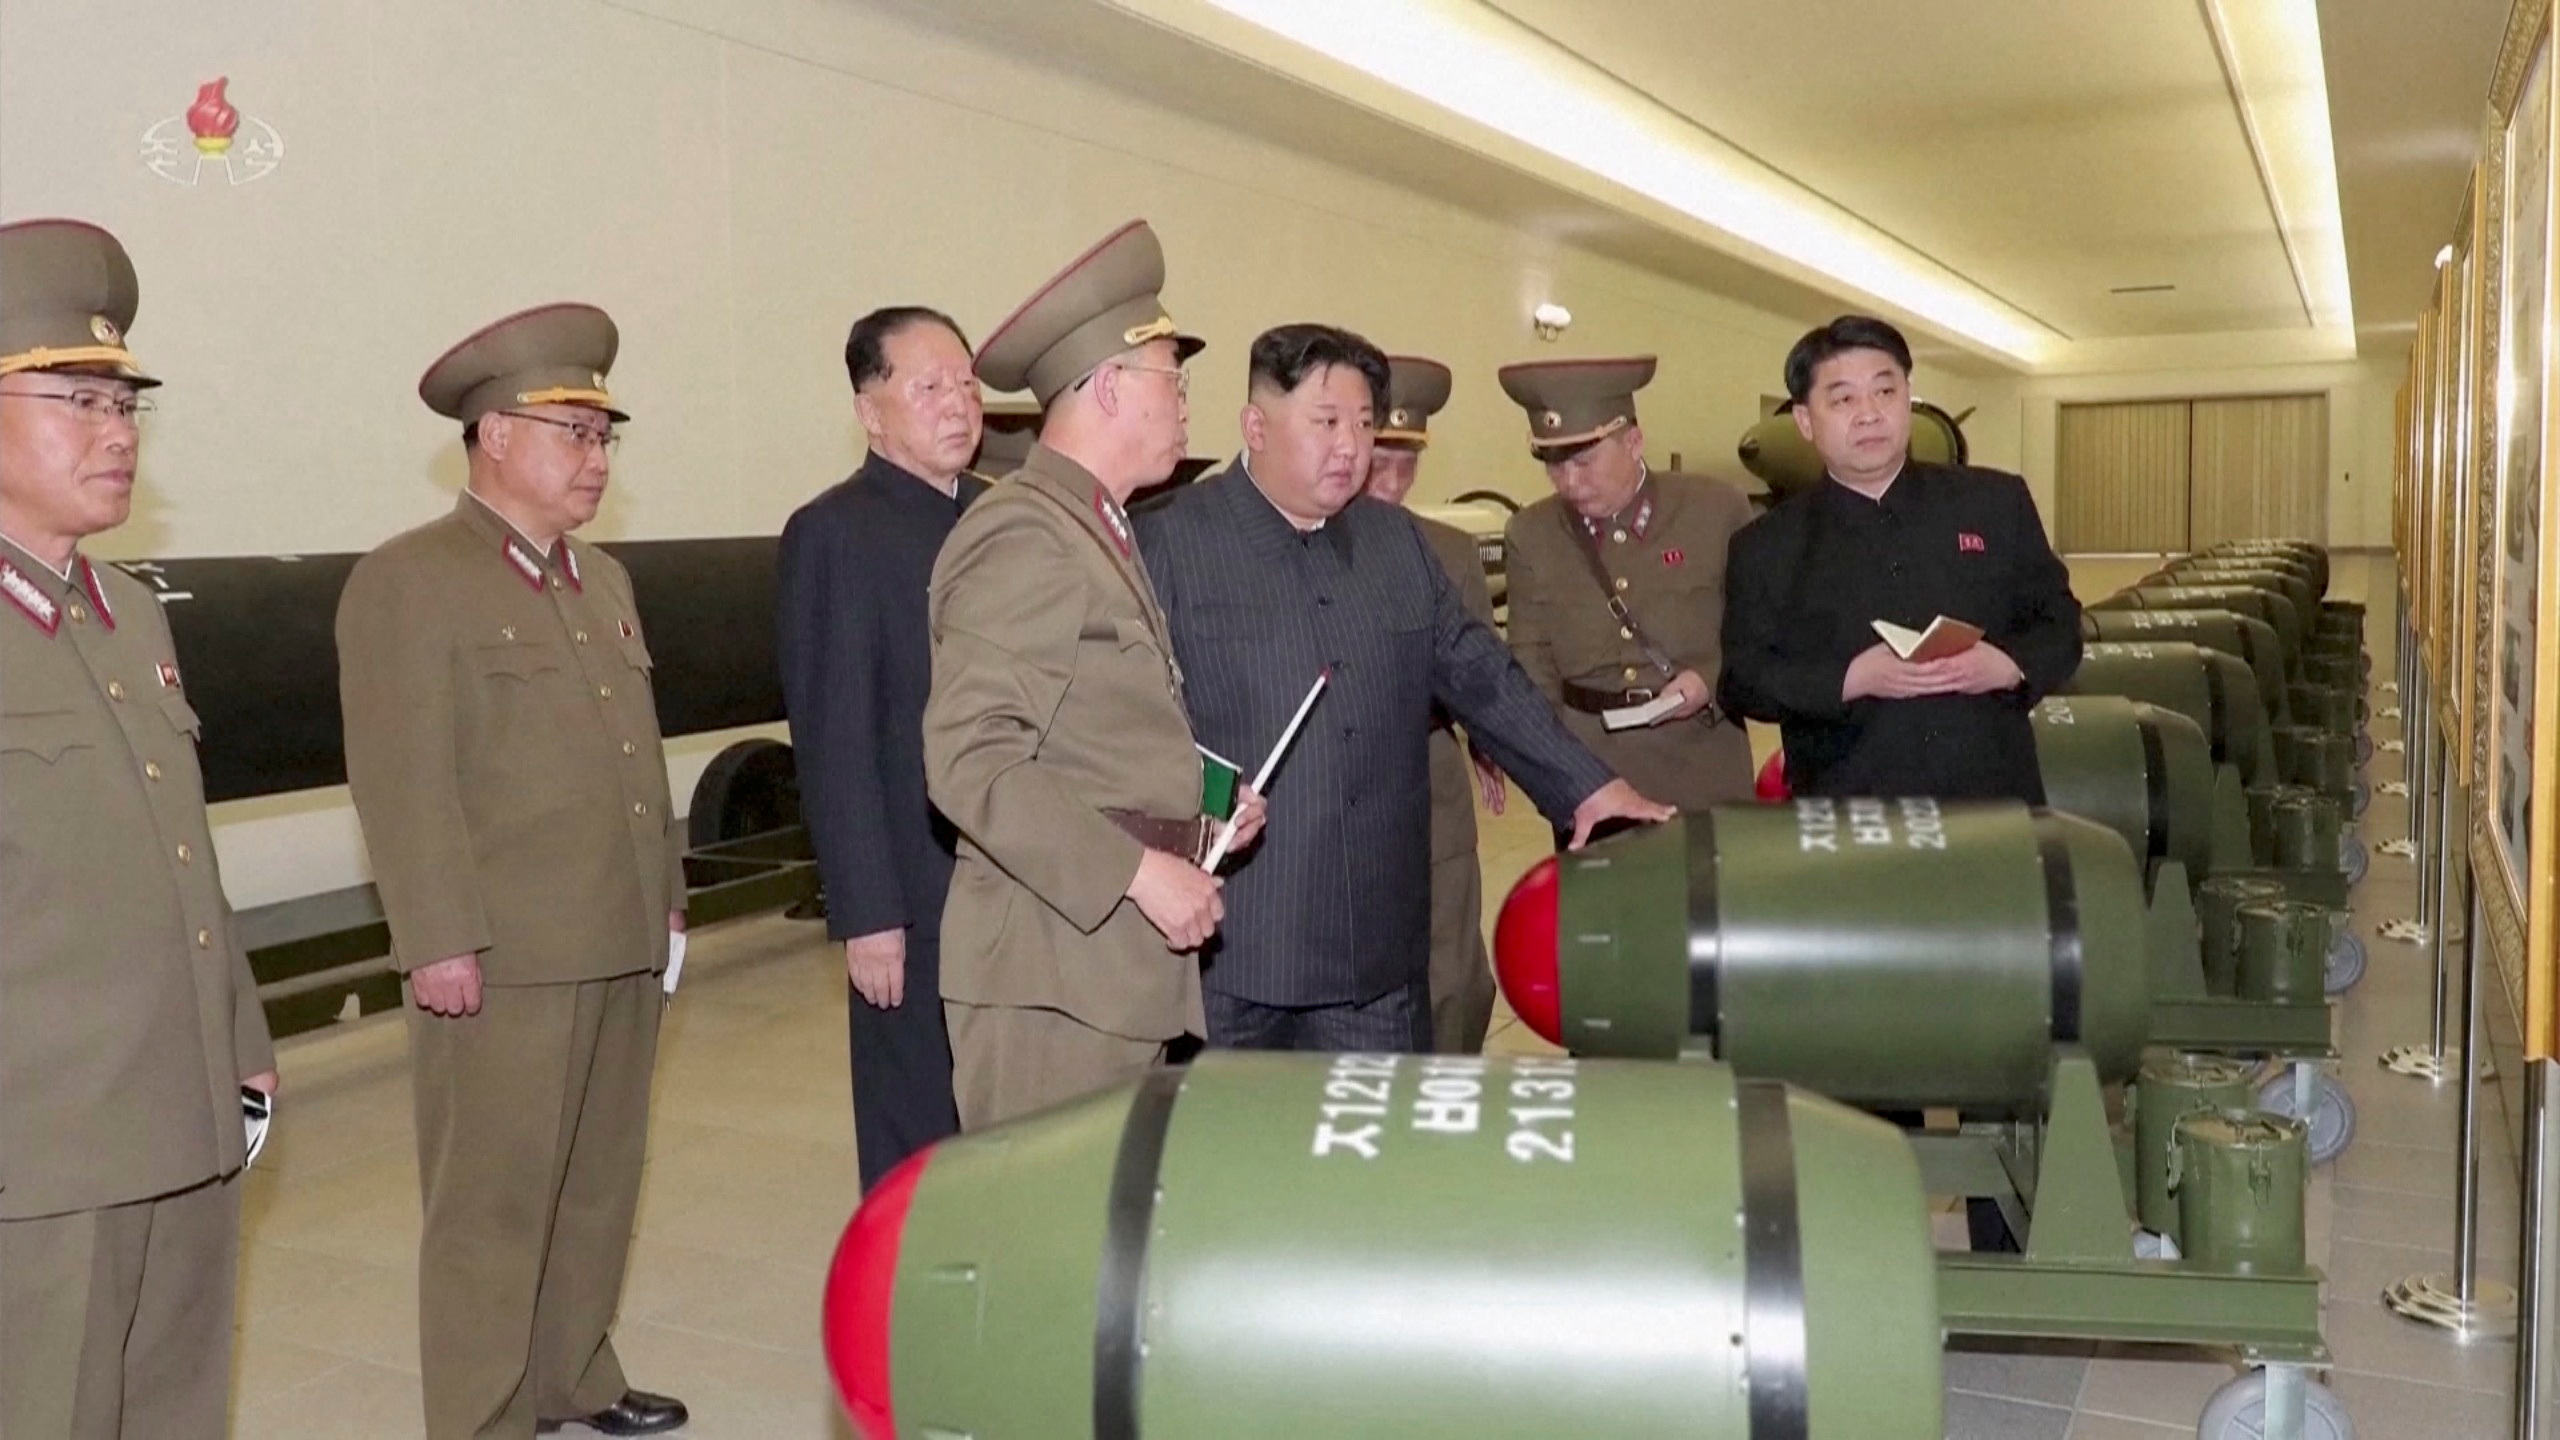 North Korean leader Kim Jong Un inspects nuclear warheads at an undisclosed location